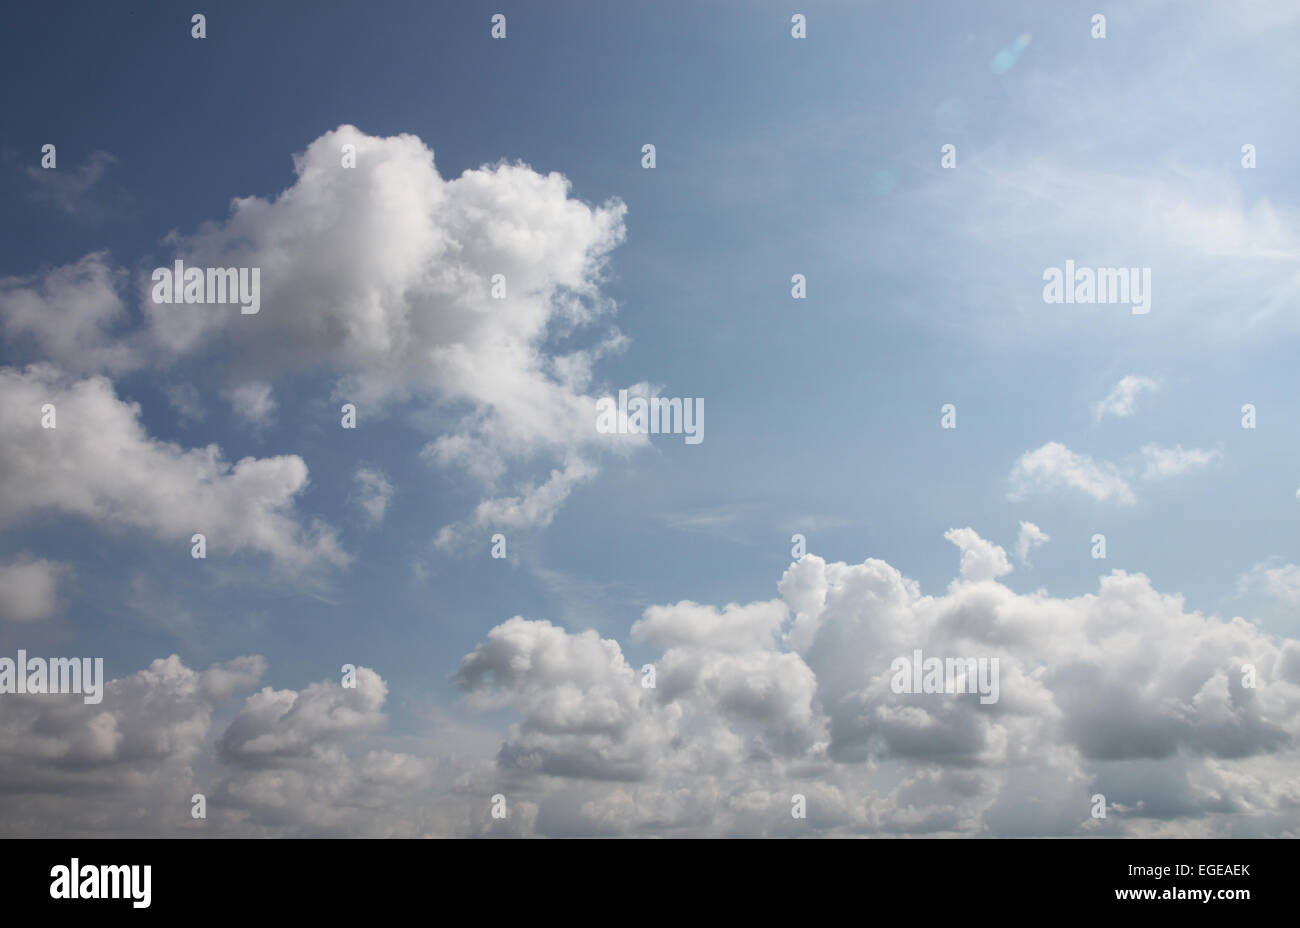 Clouds on the blue sky in the daytime. Stock Photo